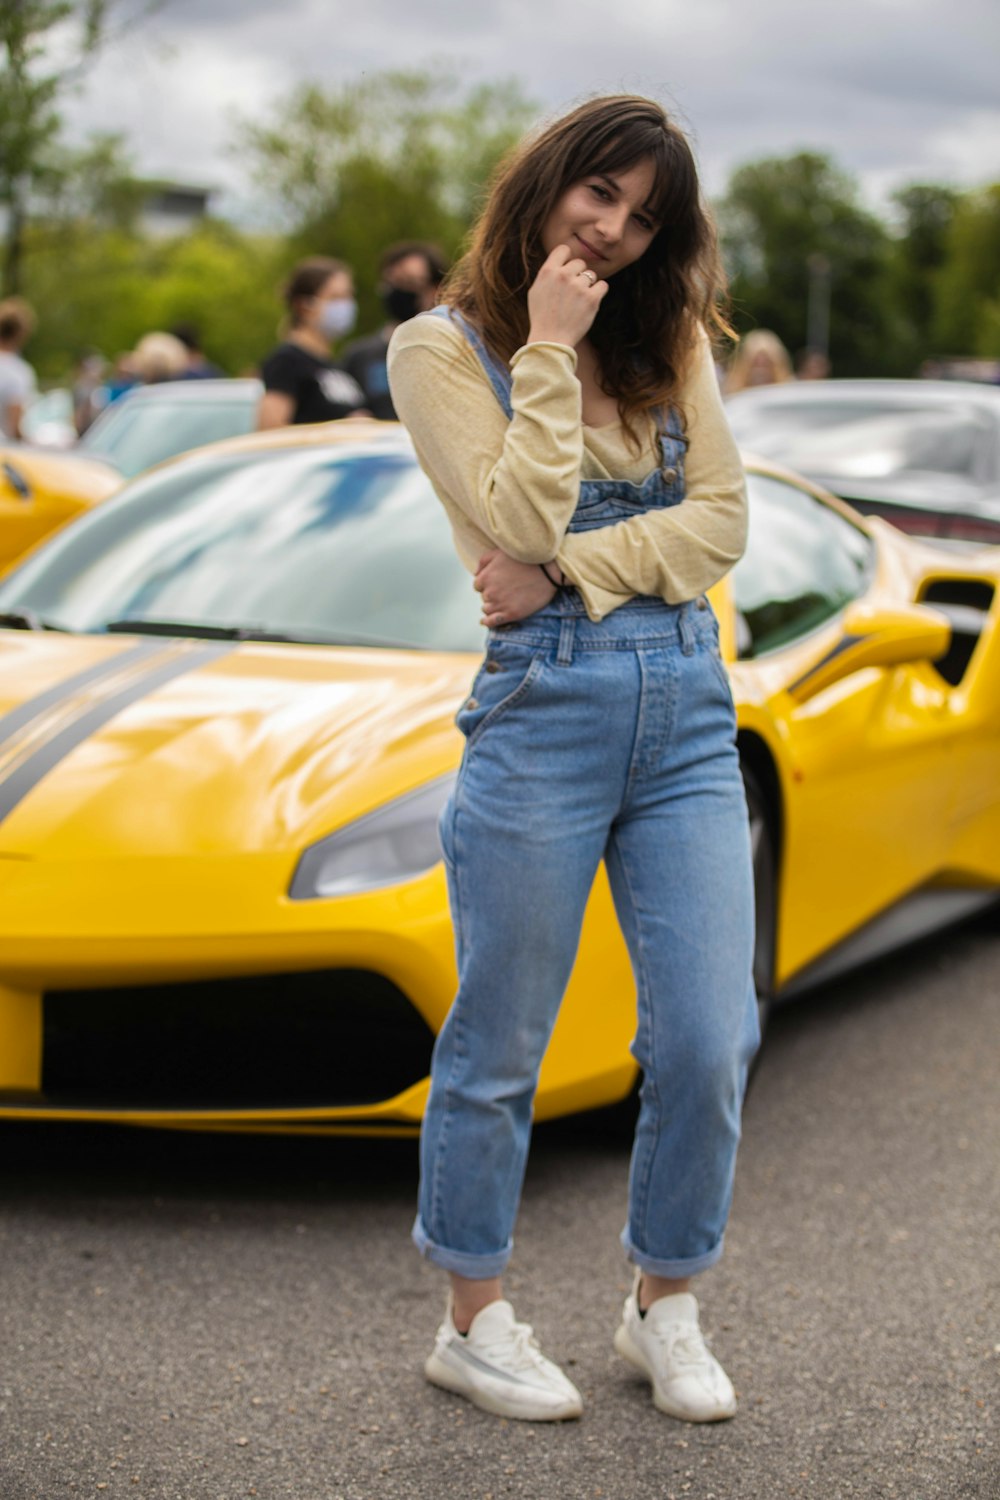 woman in gray long sleeve shirt and blue denim jeans standing beside yellow car during daytime